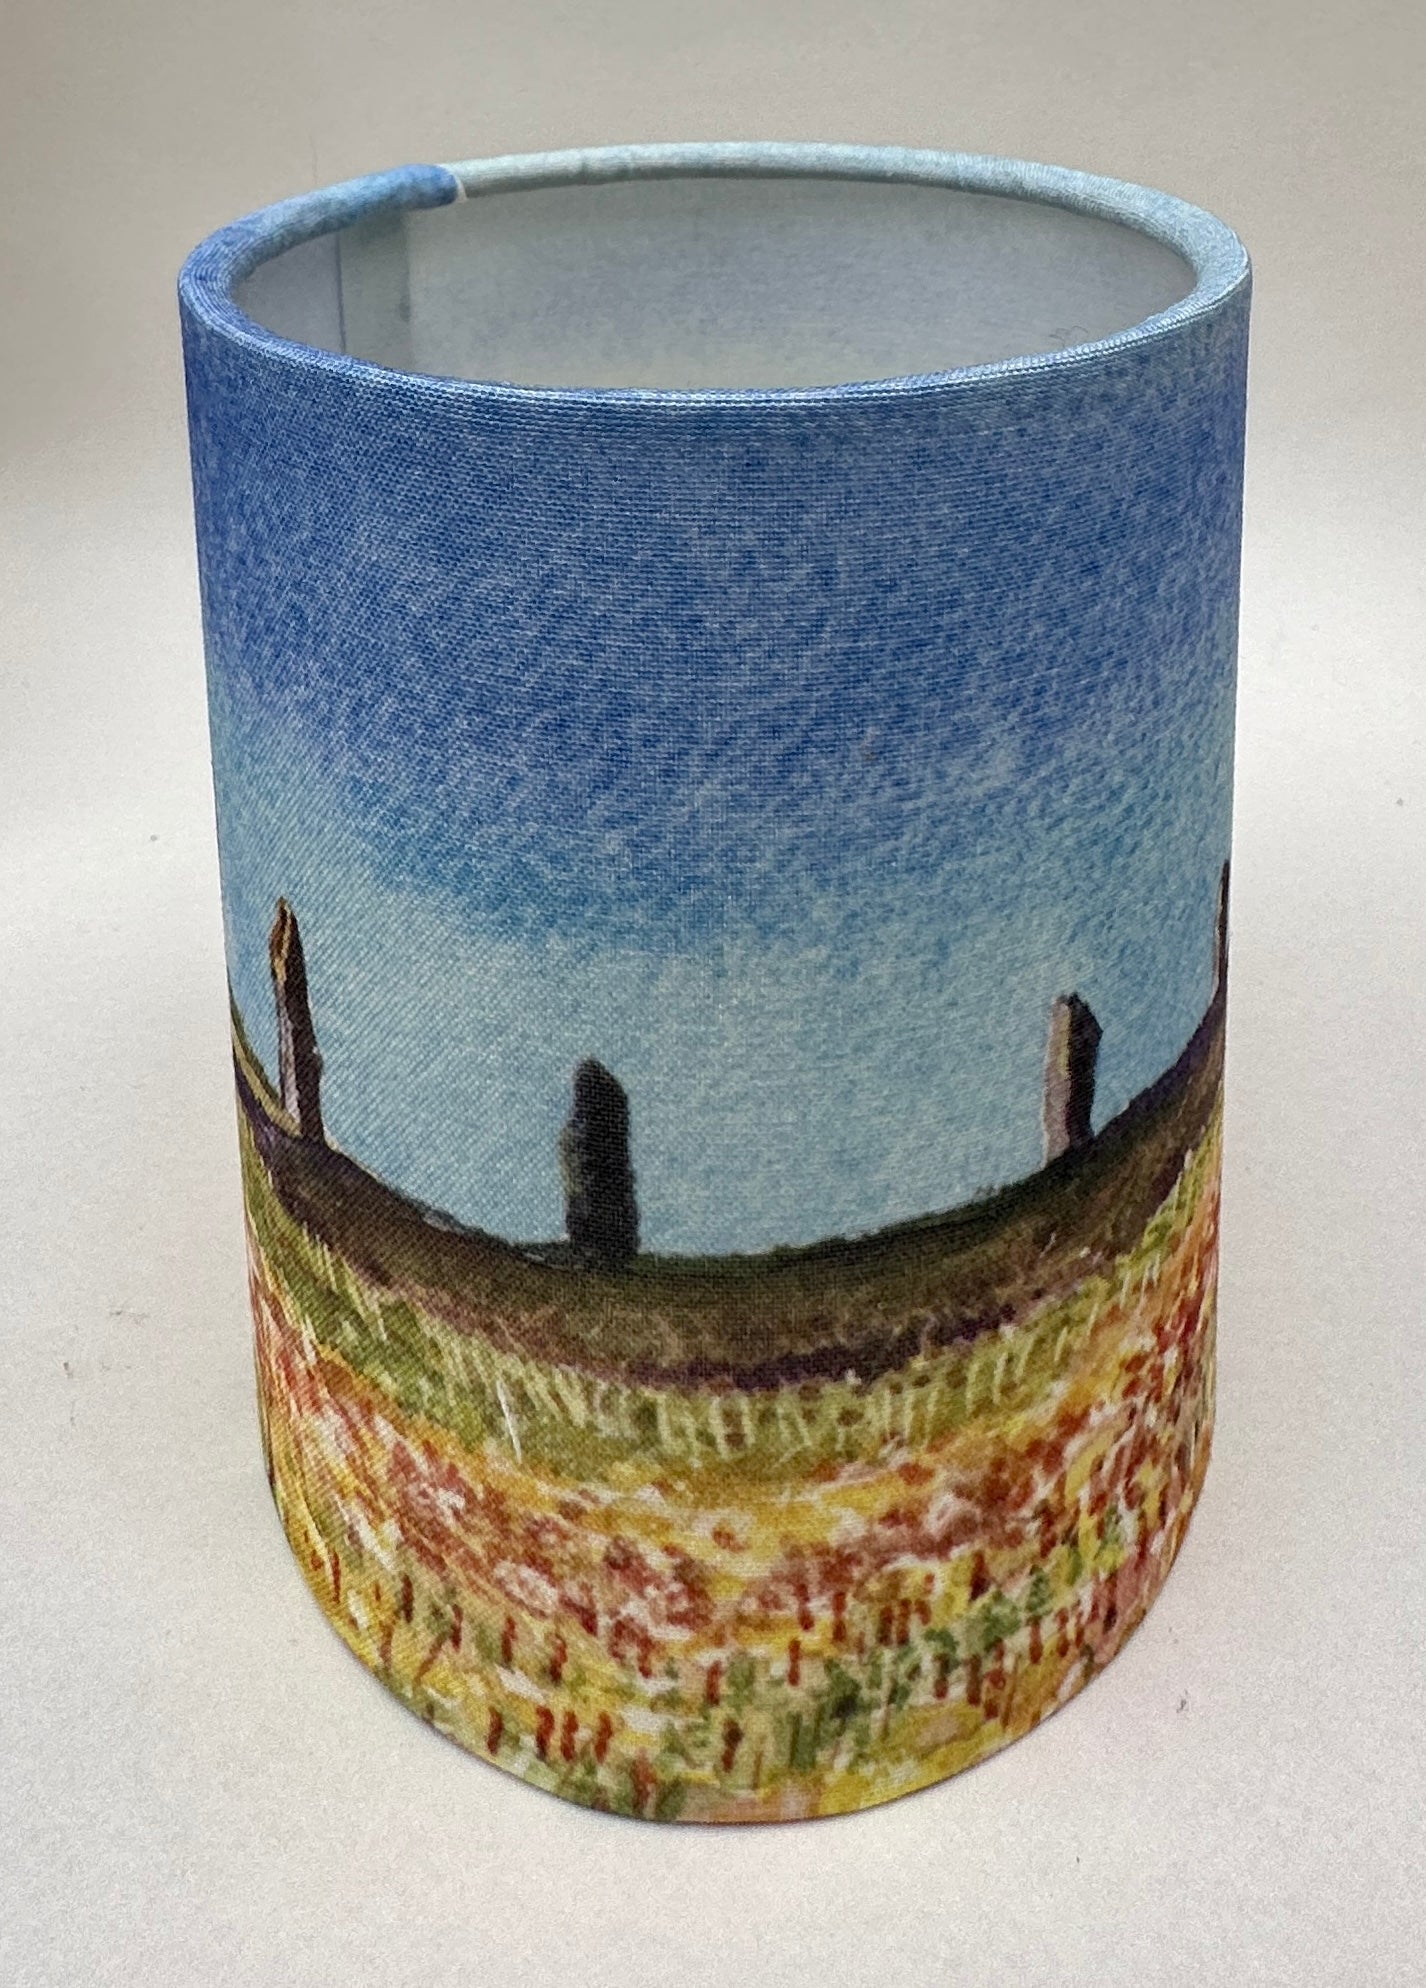 Small candle lamp/Dandelions and The Ring of Brodgar, Orkney